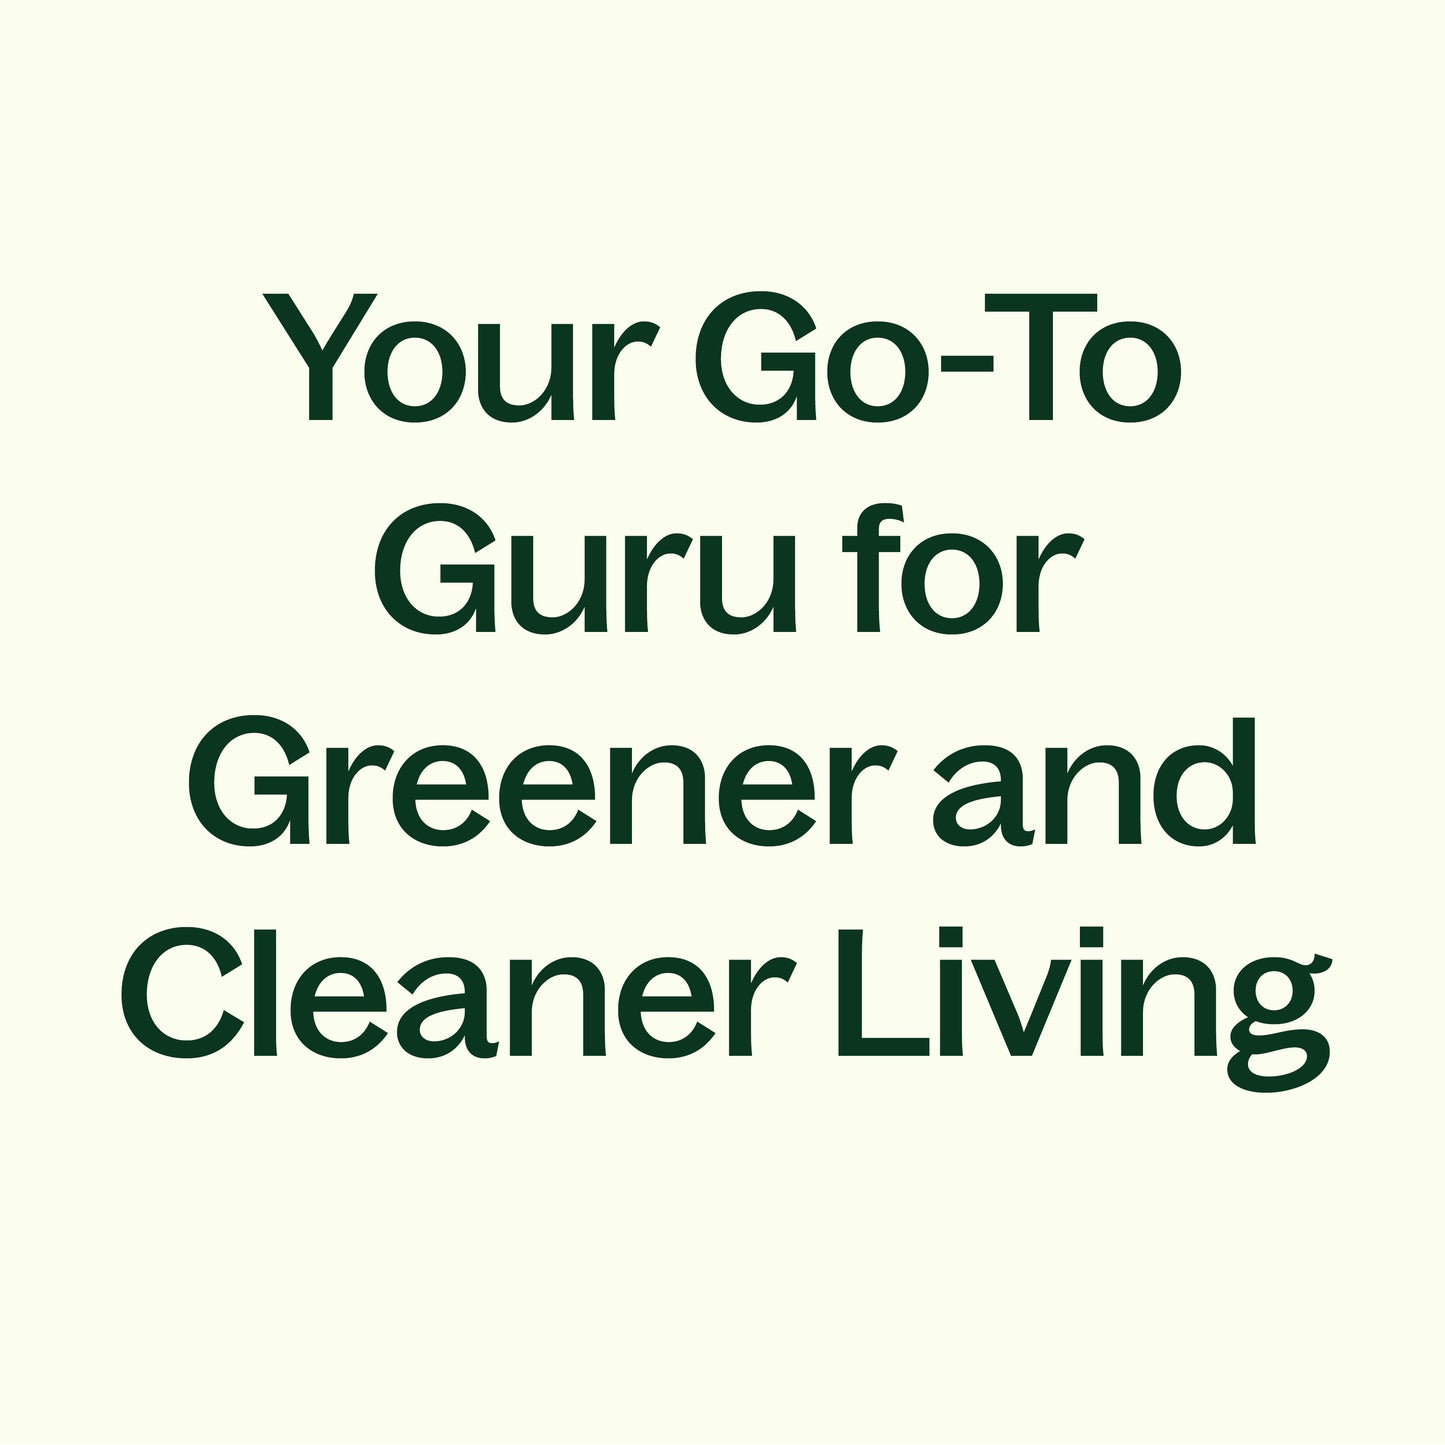 Your go to guru for greener, cleaner living